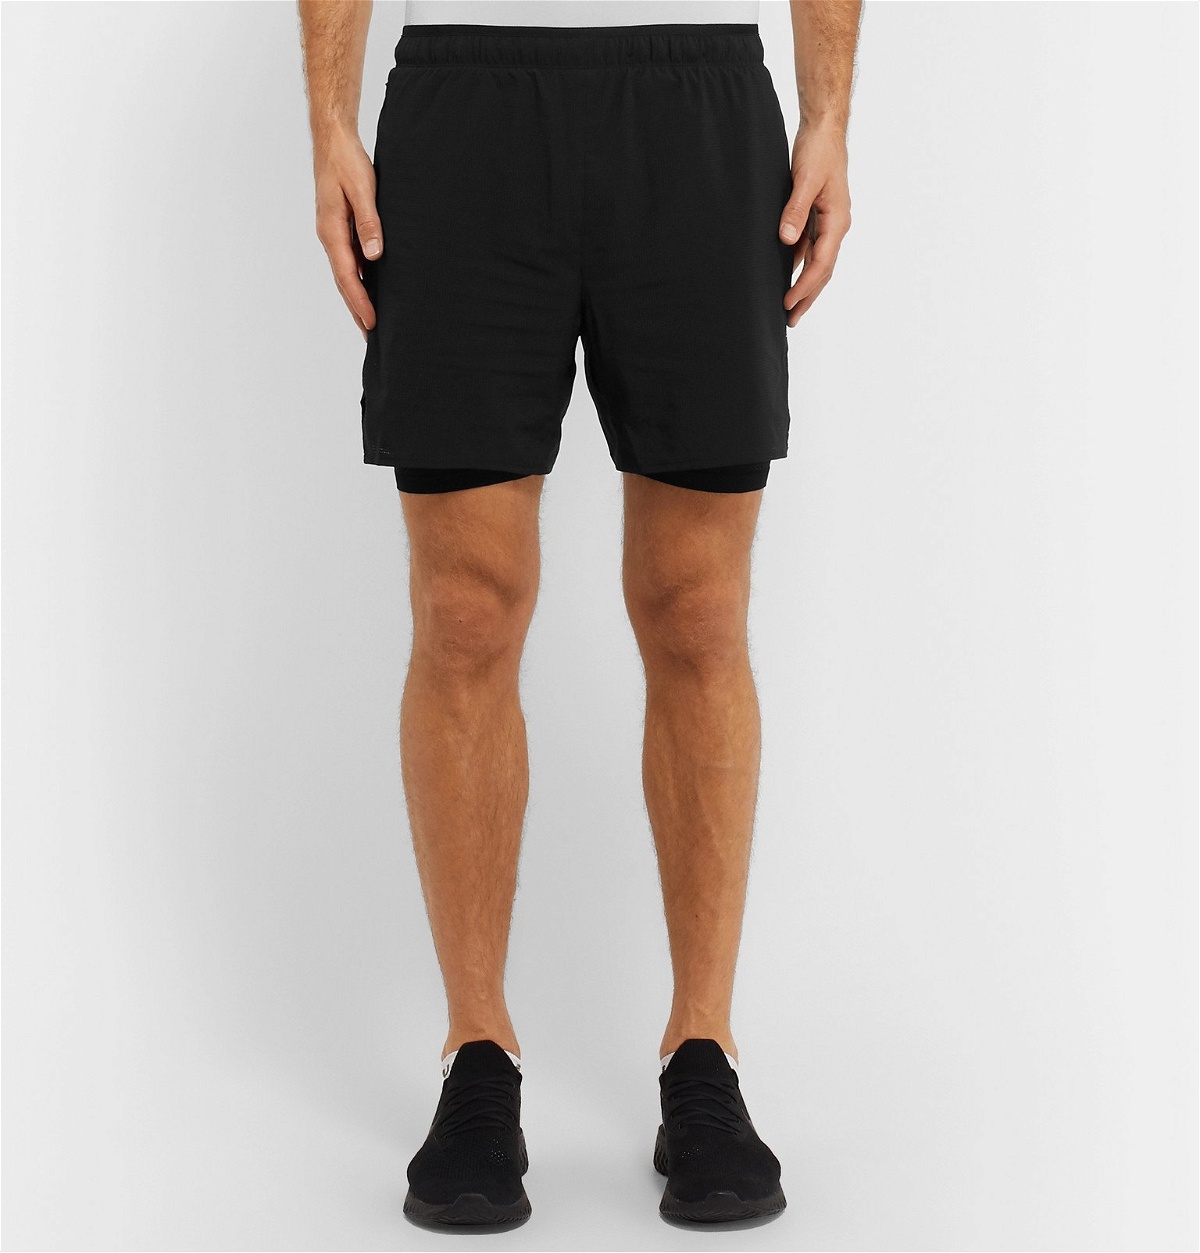 Reigning Champ - Performance Perforated Shell Shorts - Black Reigning Champ